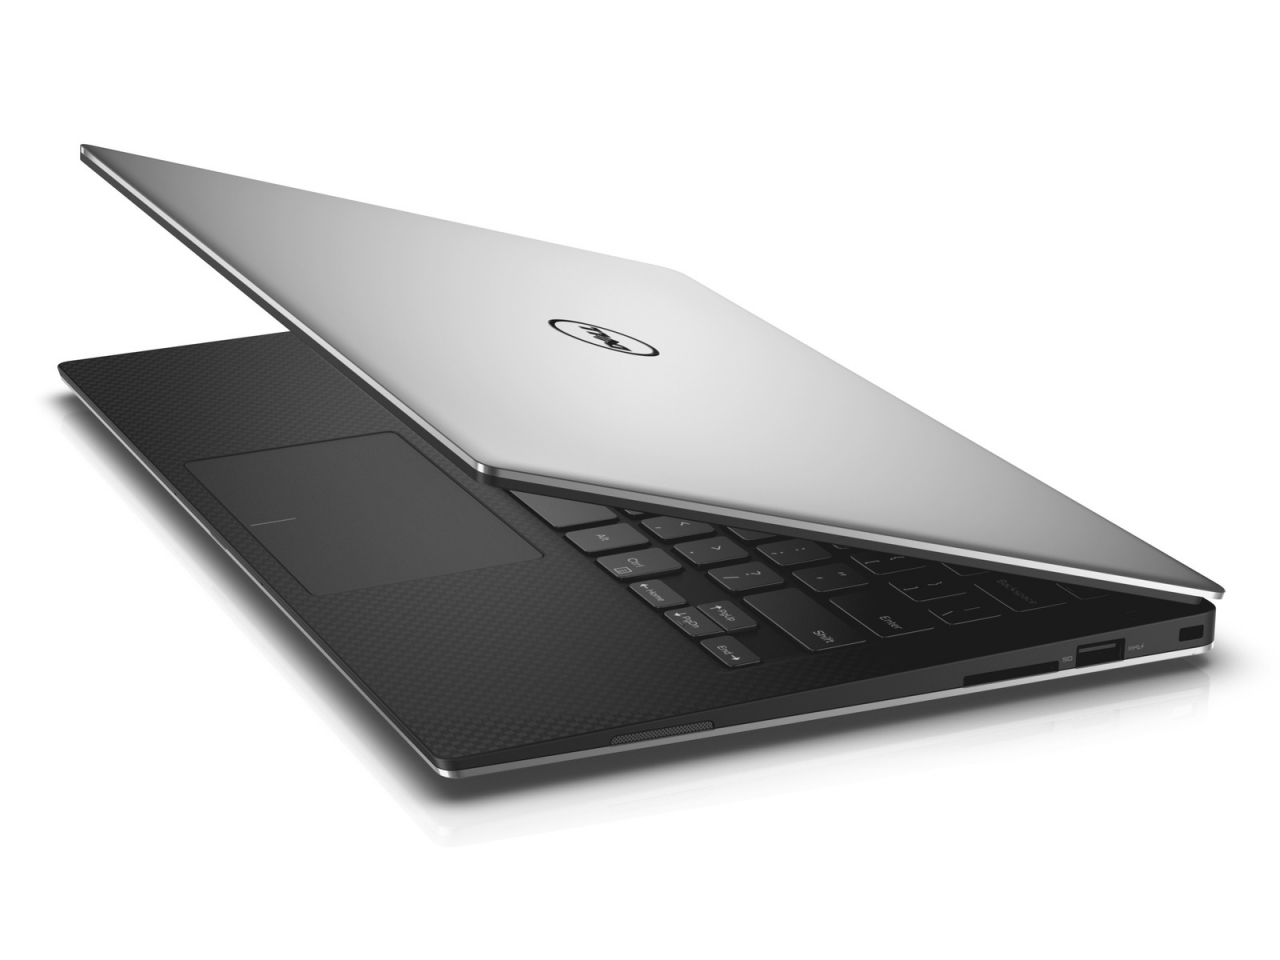 New Dell XPS 13 2015 for 1280 x 960 resolution